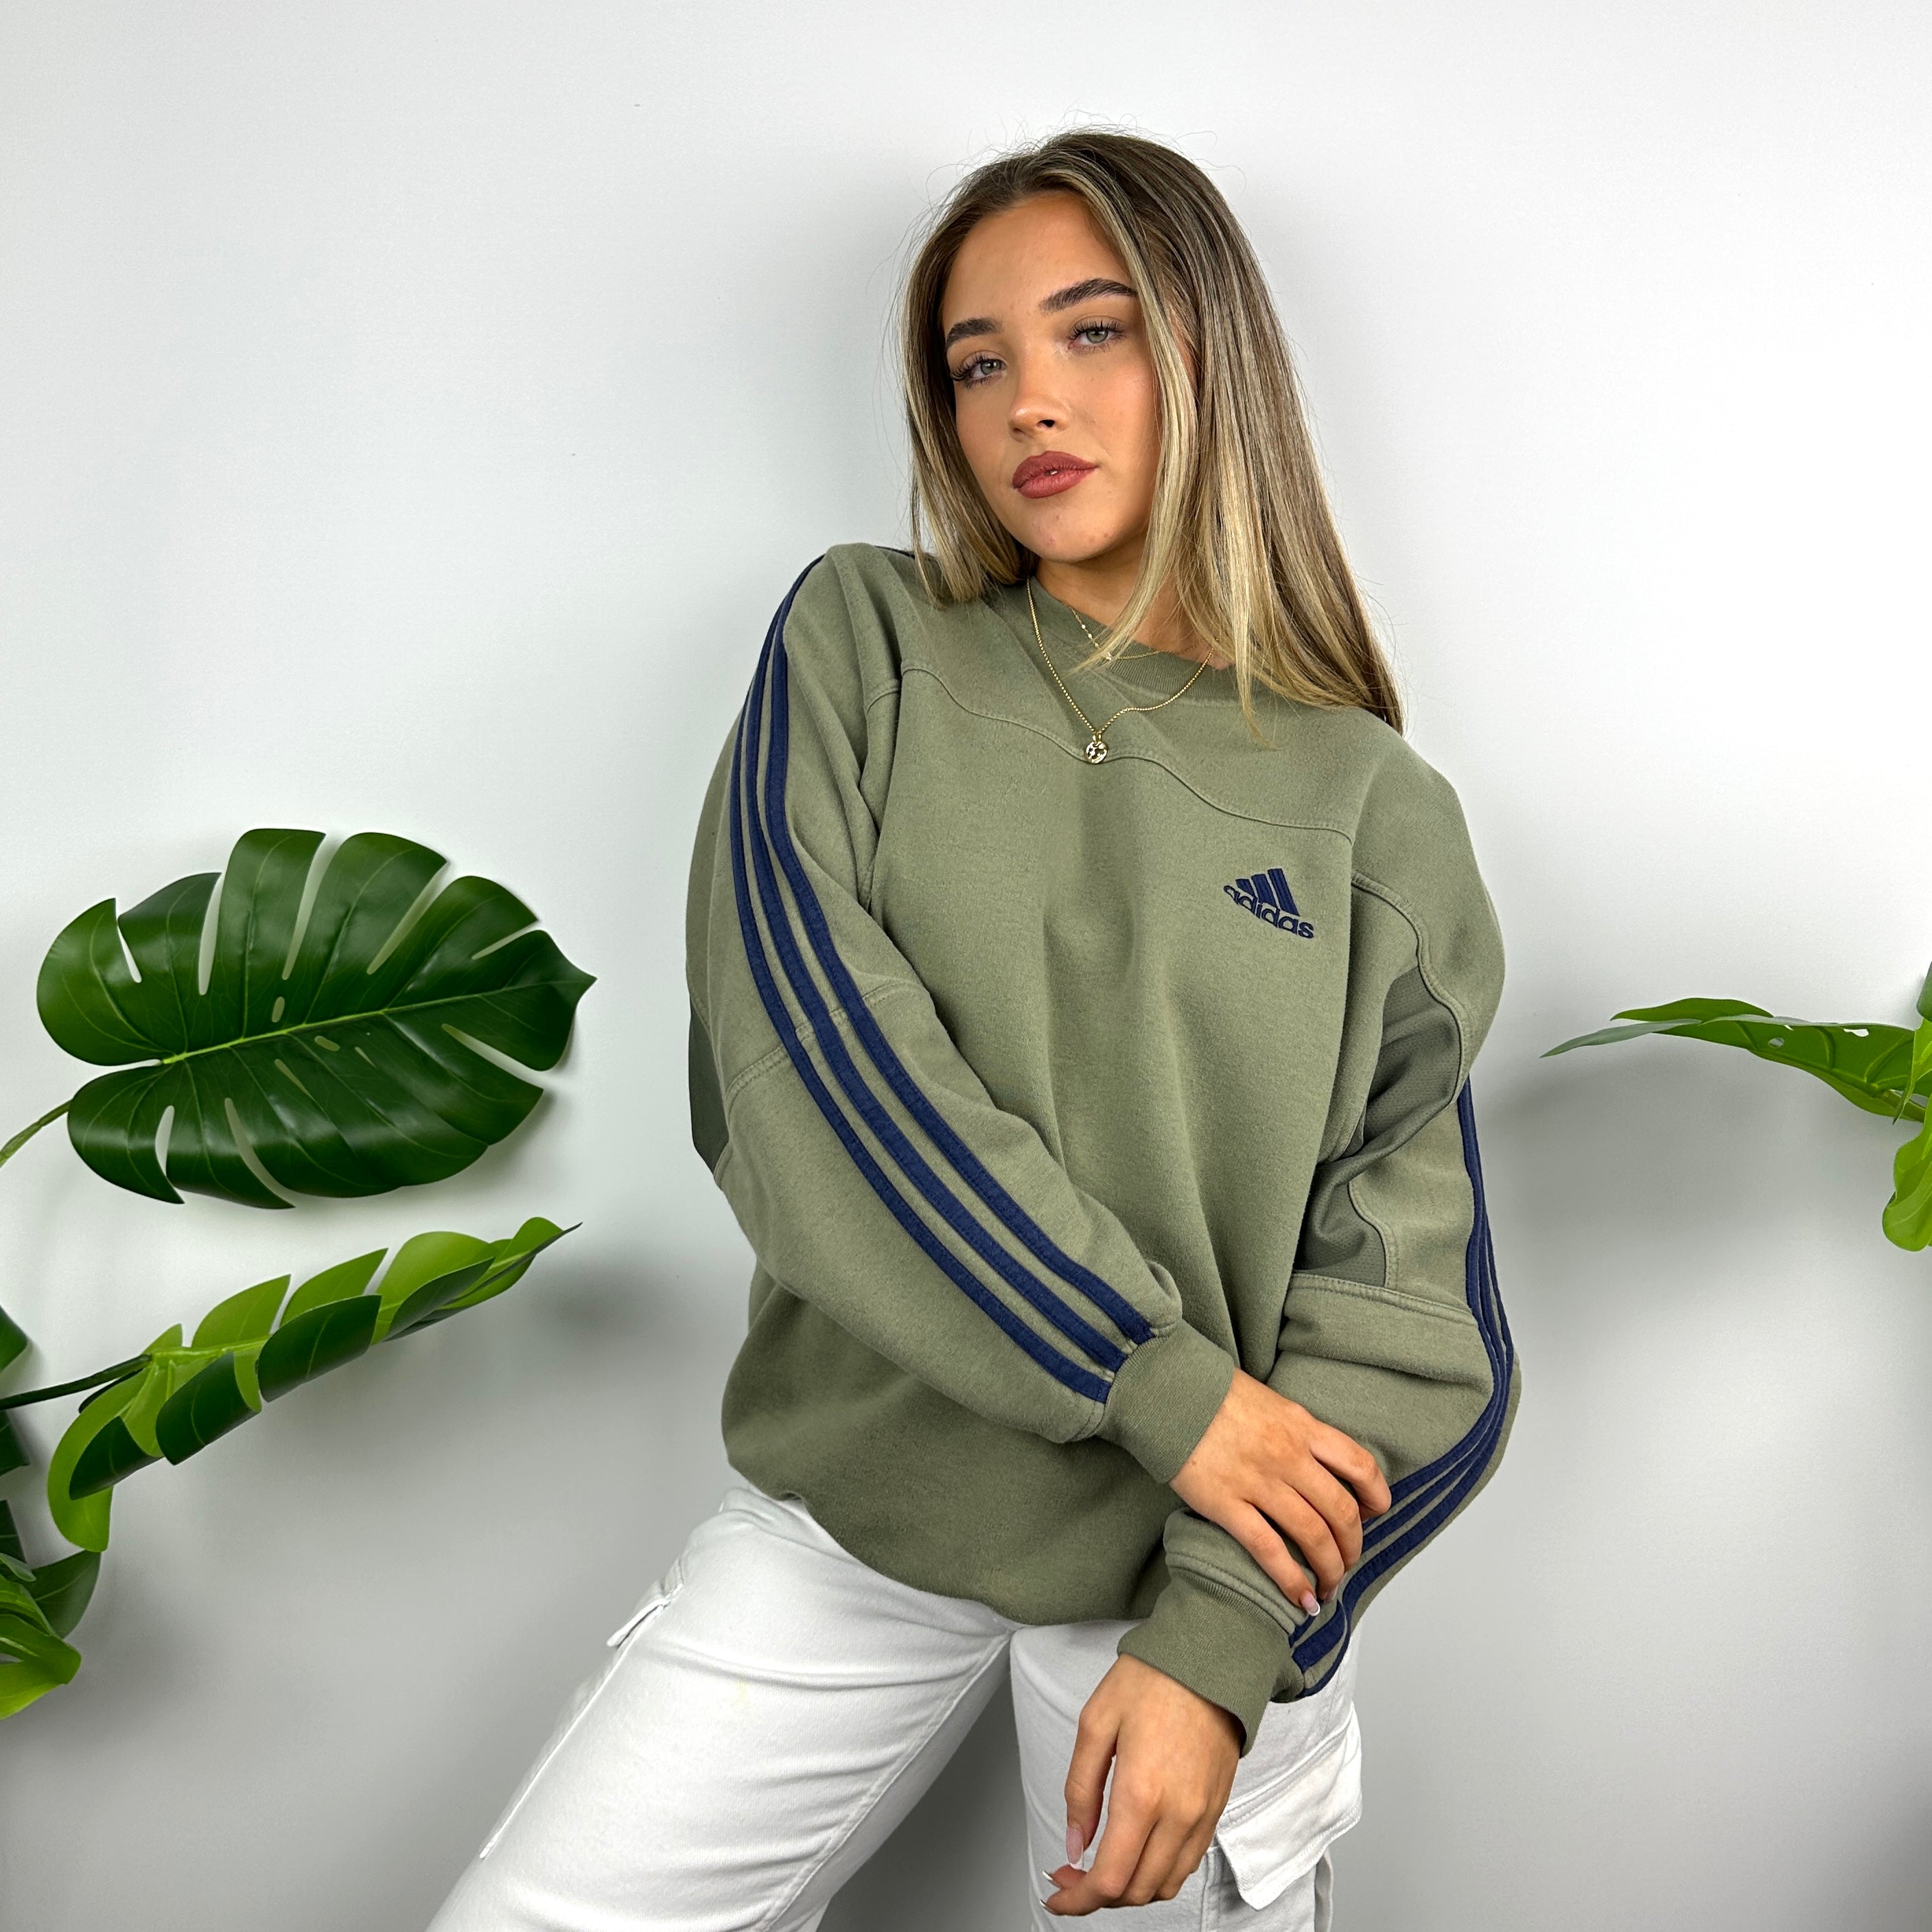 Adidas Khaki Green Embroidered Spell Out Sweatshirt (L)